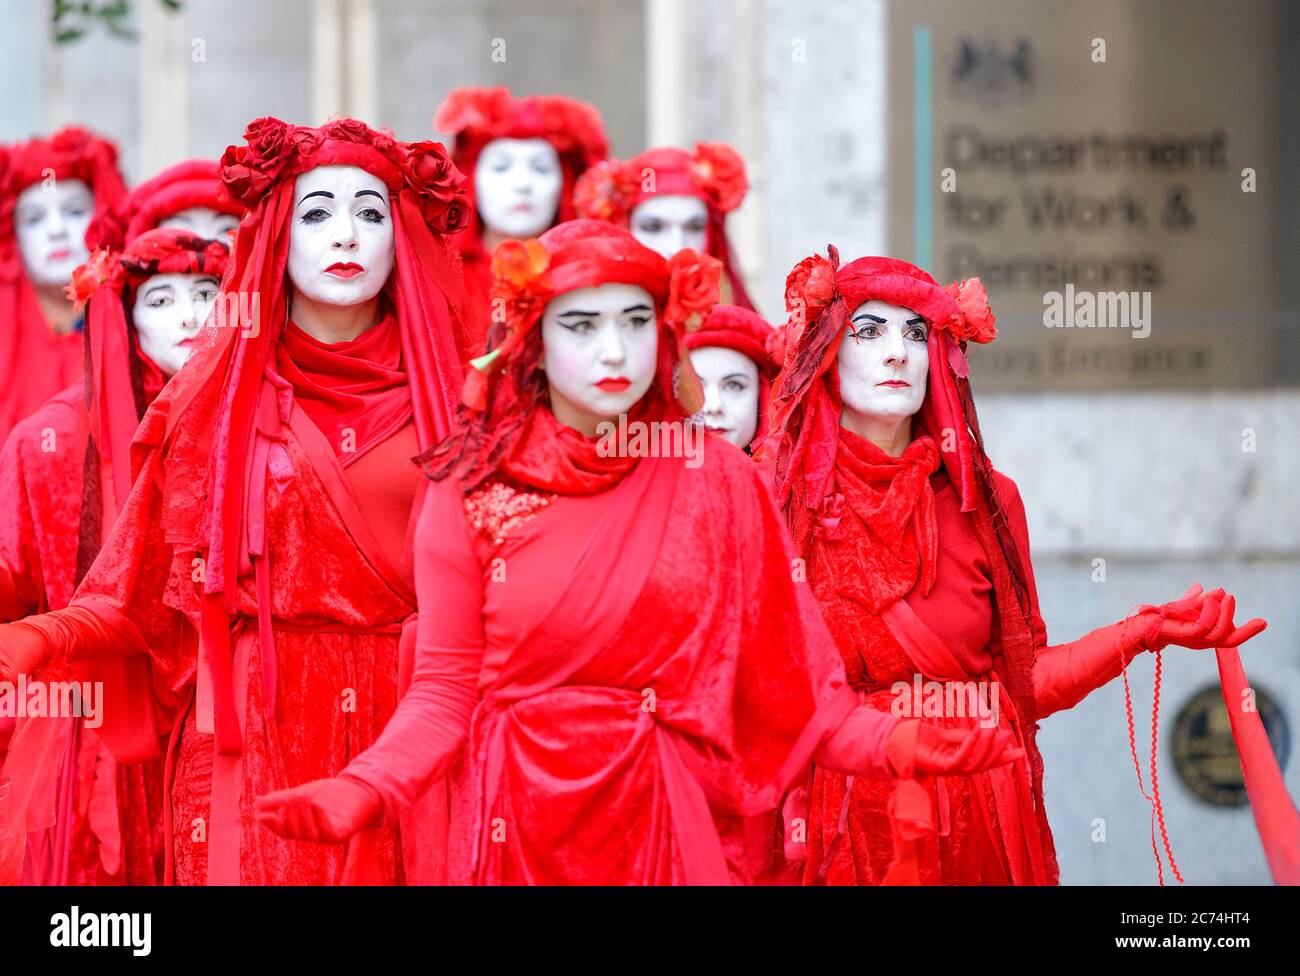 London, UK. 17th October 2019. Despite a city-wide ban on protests, member of Extinction Rebellion's Red Brigade walk slowly from Trafalgar Square to Stock Photo